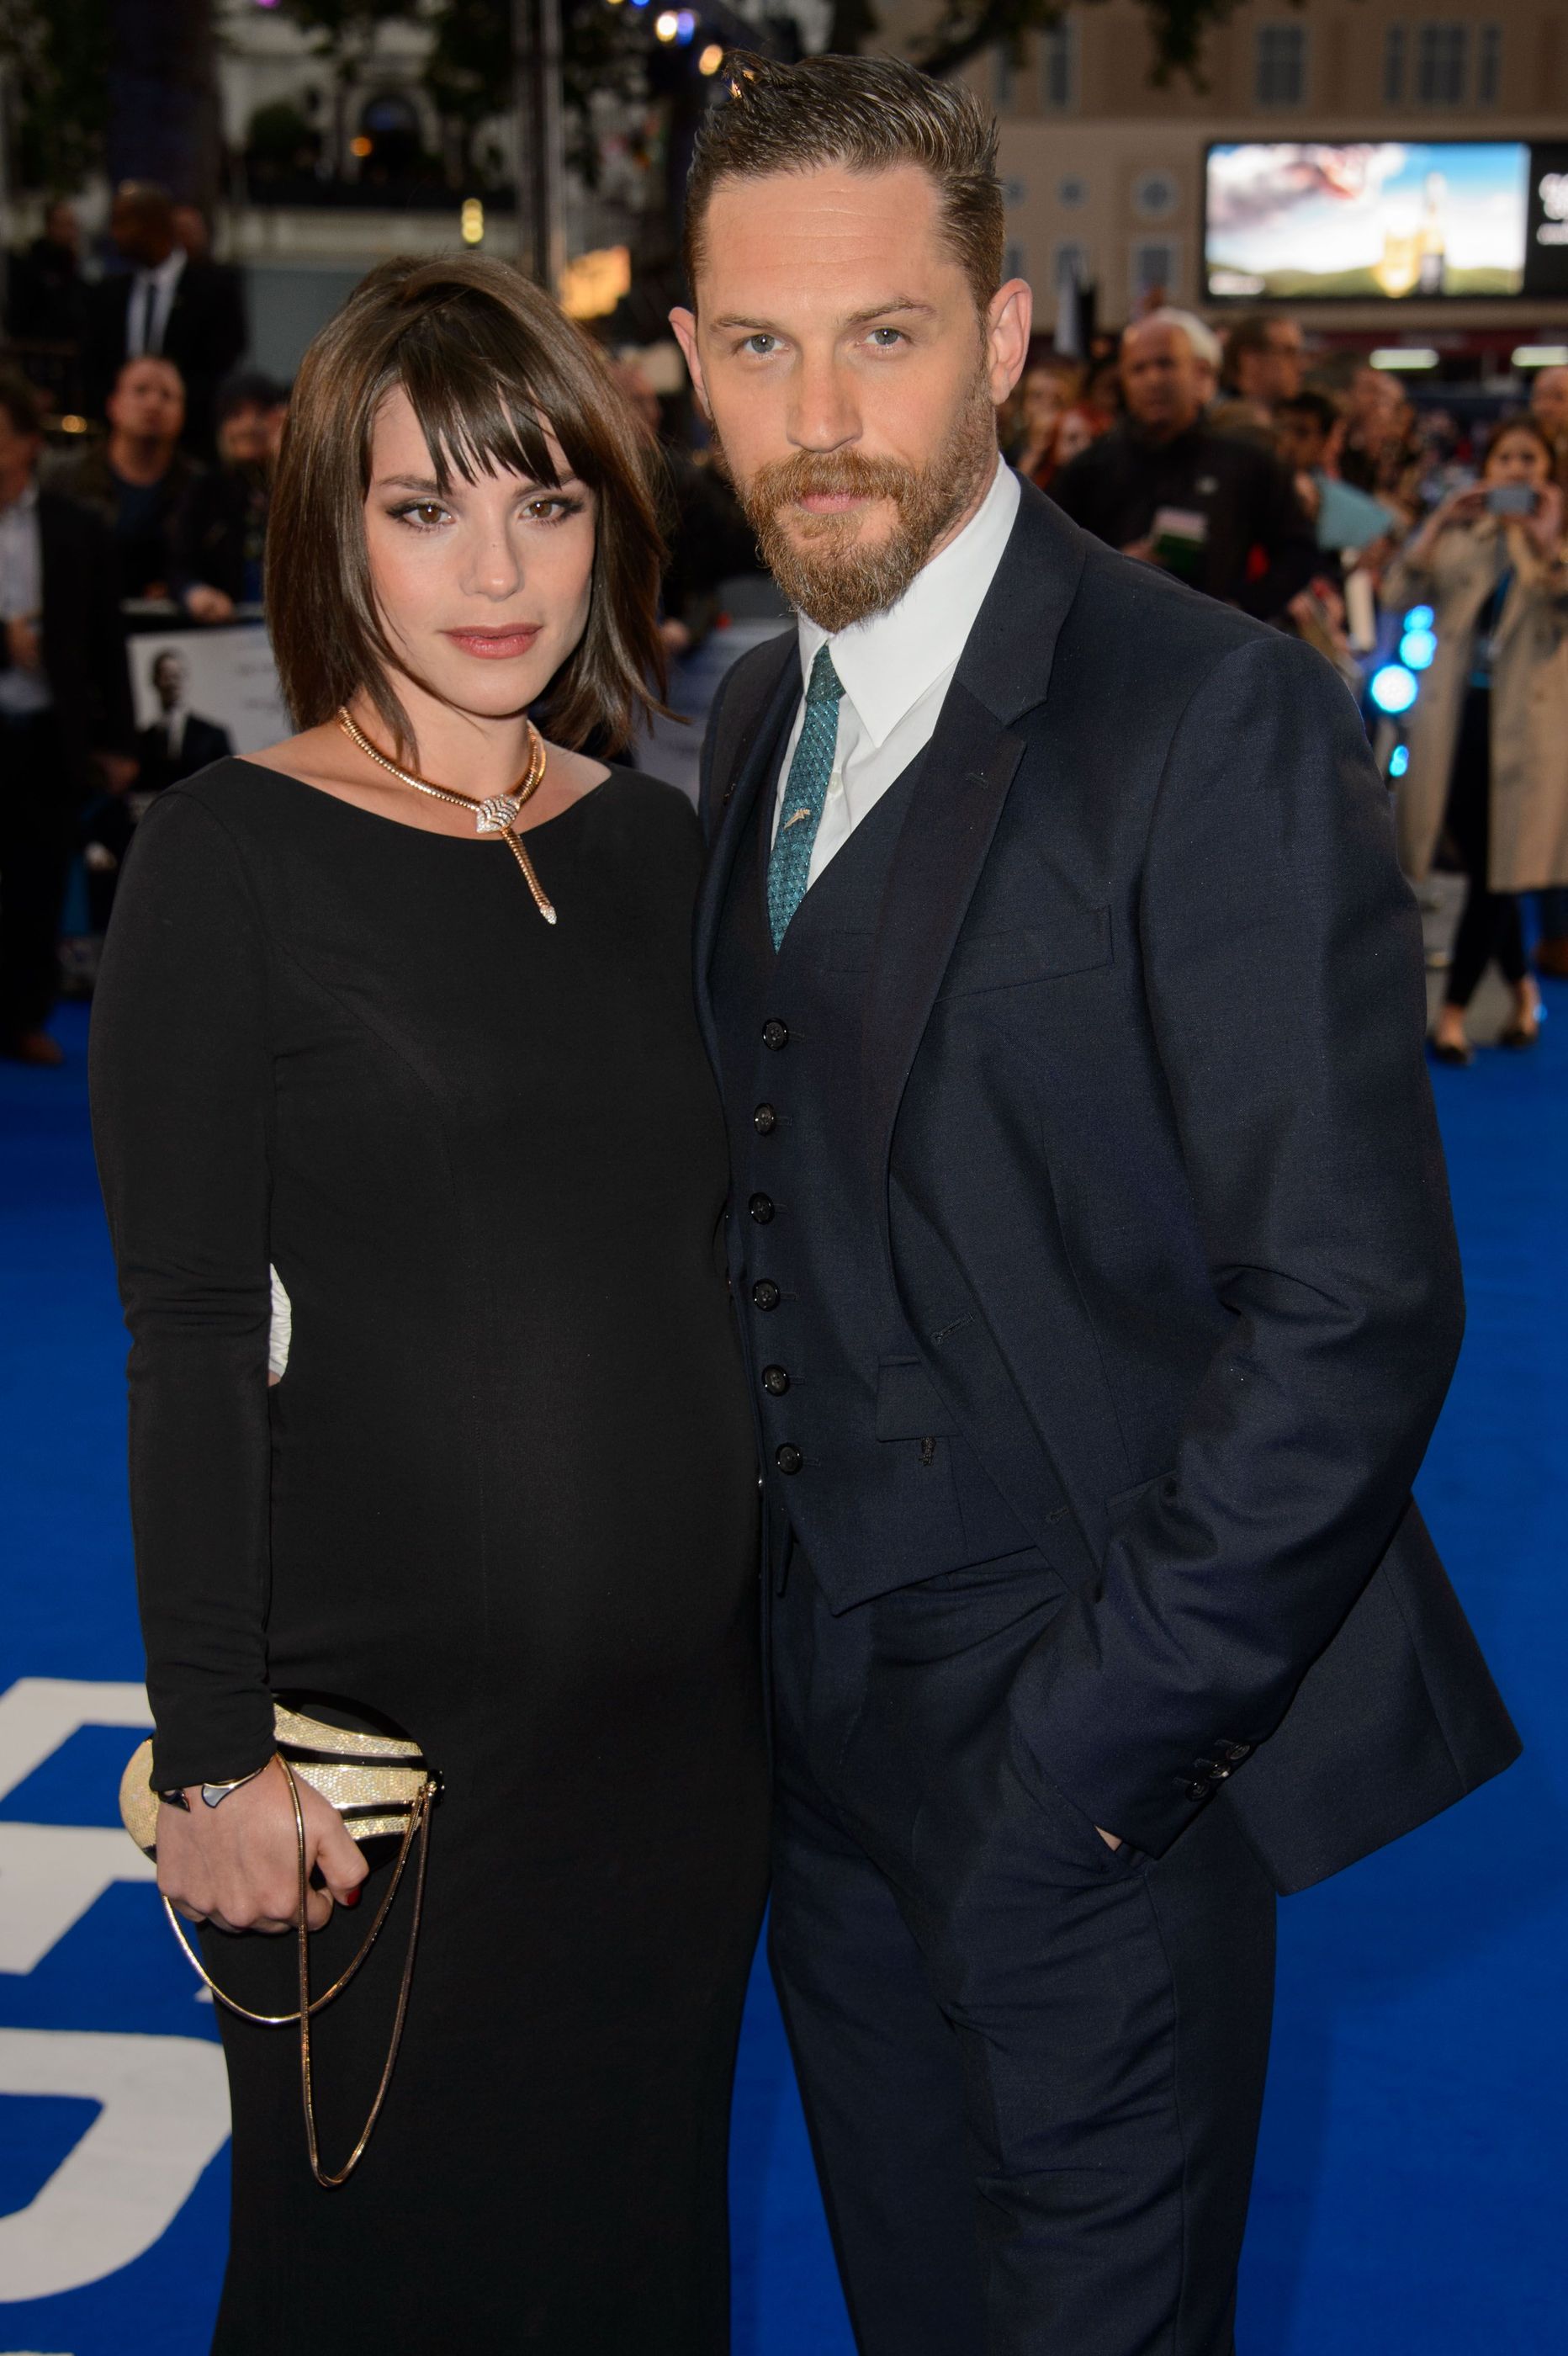 From left, British actress Charlotte Riley and British actor Tom Hardy pose for photographers at the World Premiere of the film Legend at a central London cinema, London, Thursday, Sept. 3, 2015. (Photo by Jonathan Short/Invision/AP)